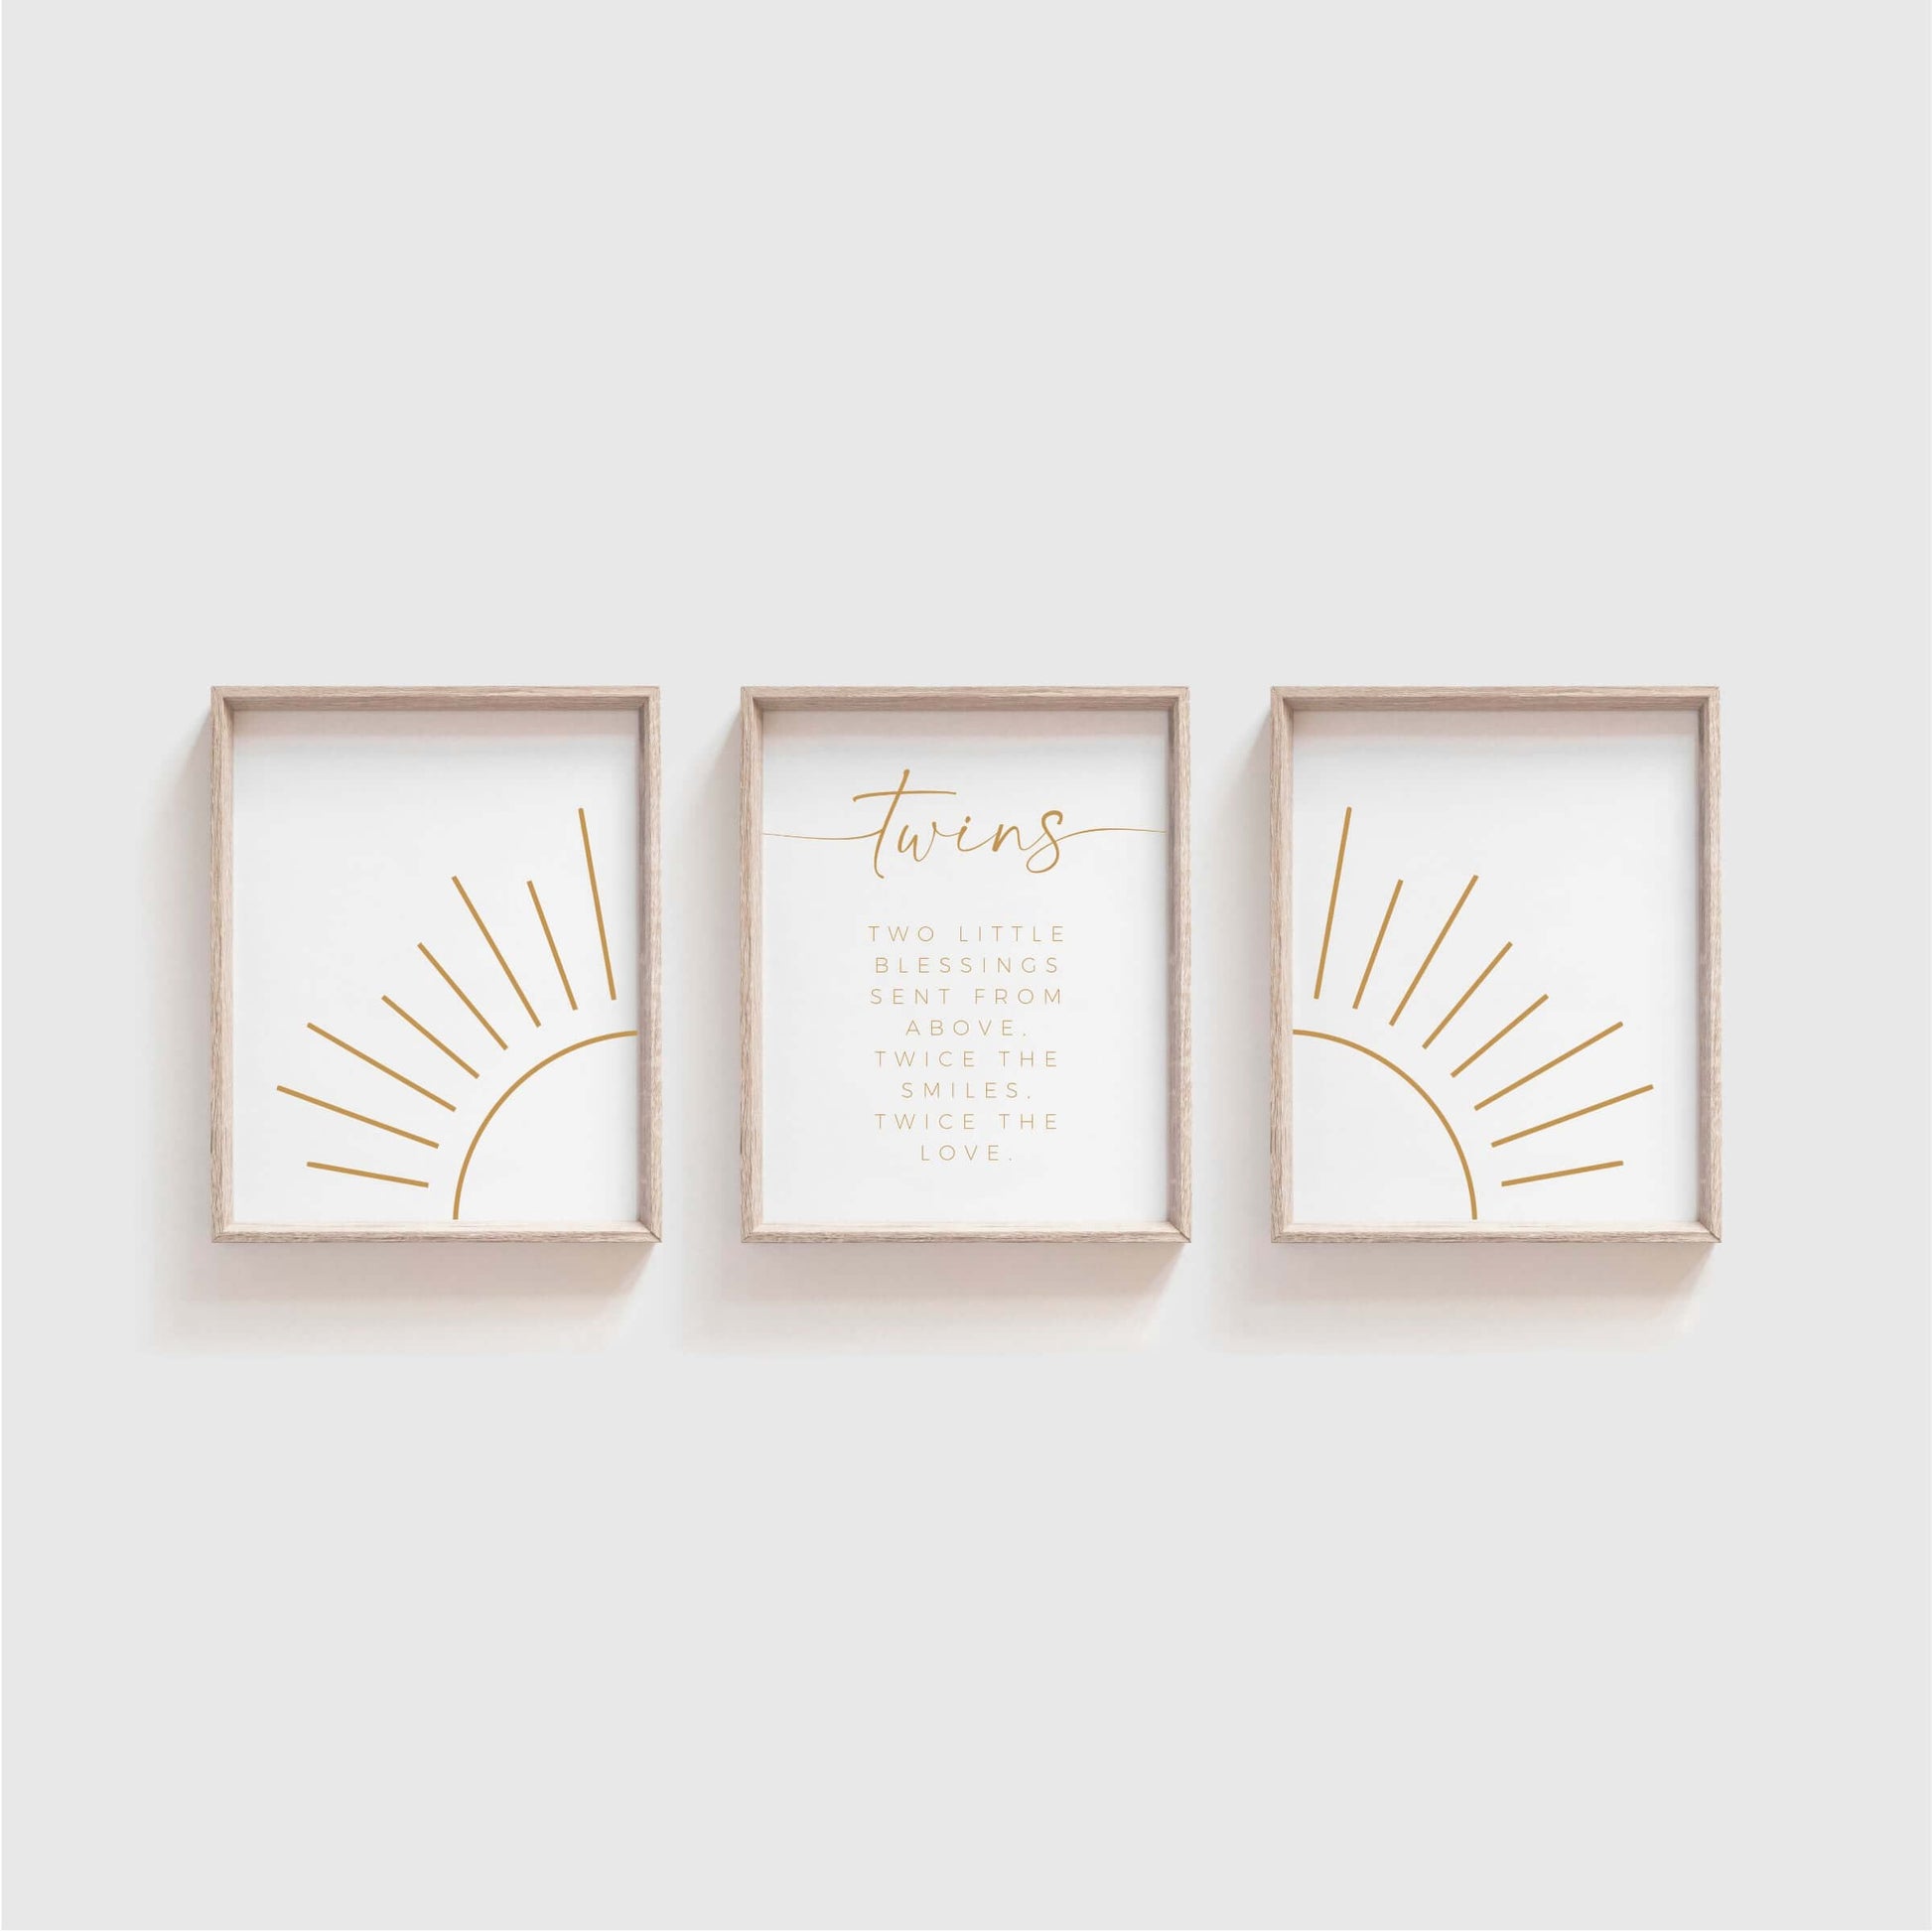 Twin Nursery Sunshine wall art is a high-quality printable wall decor set featuring a modern, boho style sunshine to complete the look of your twins' room.